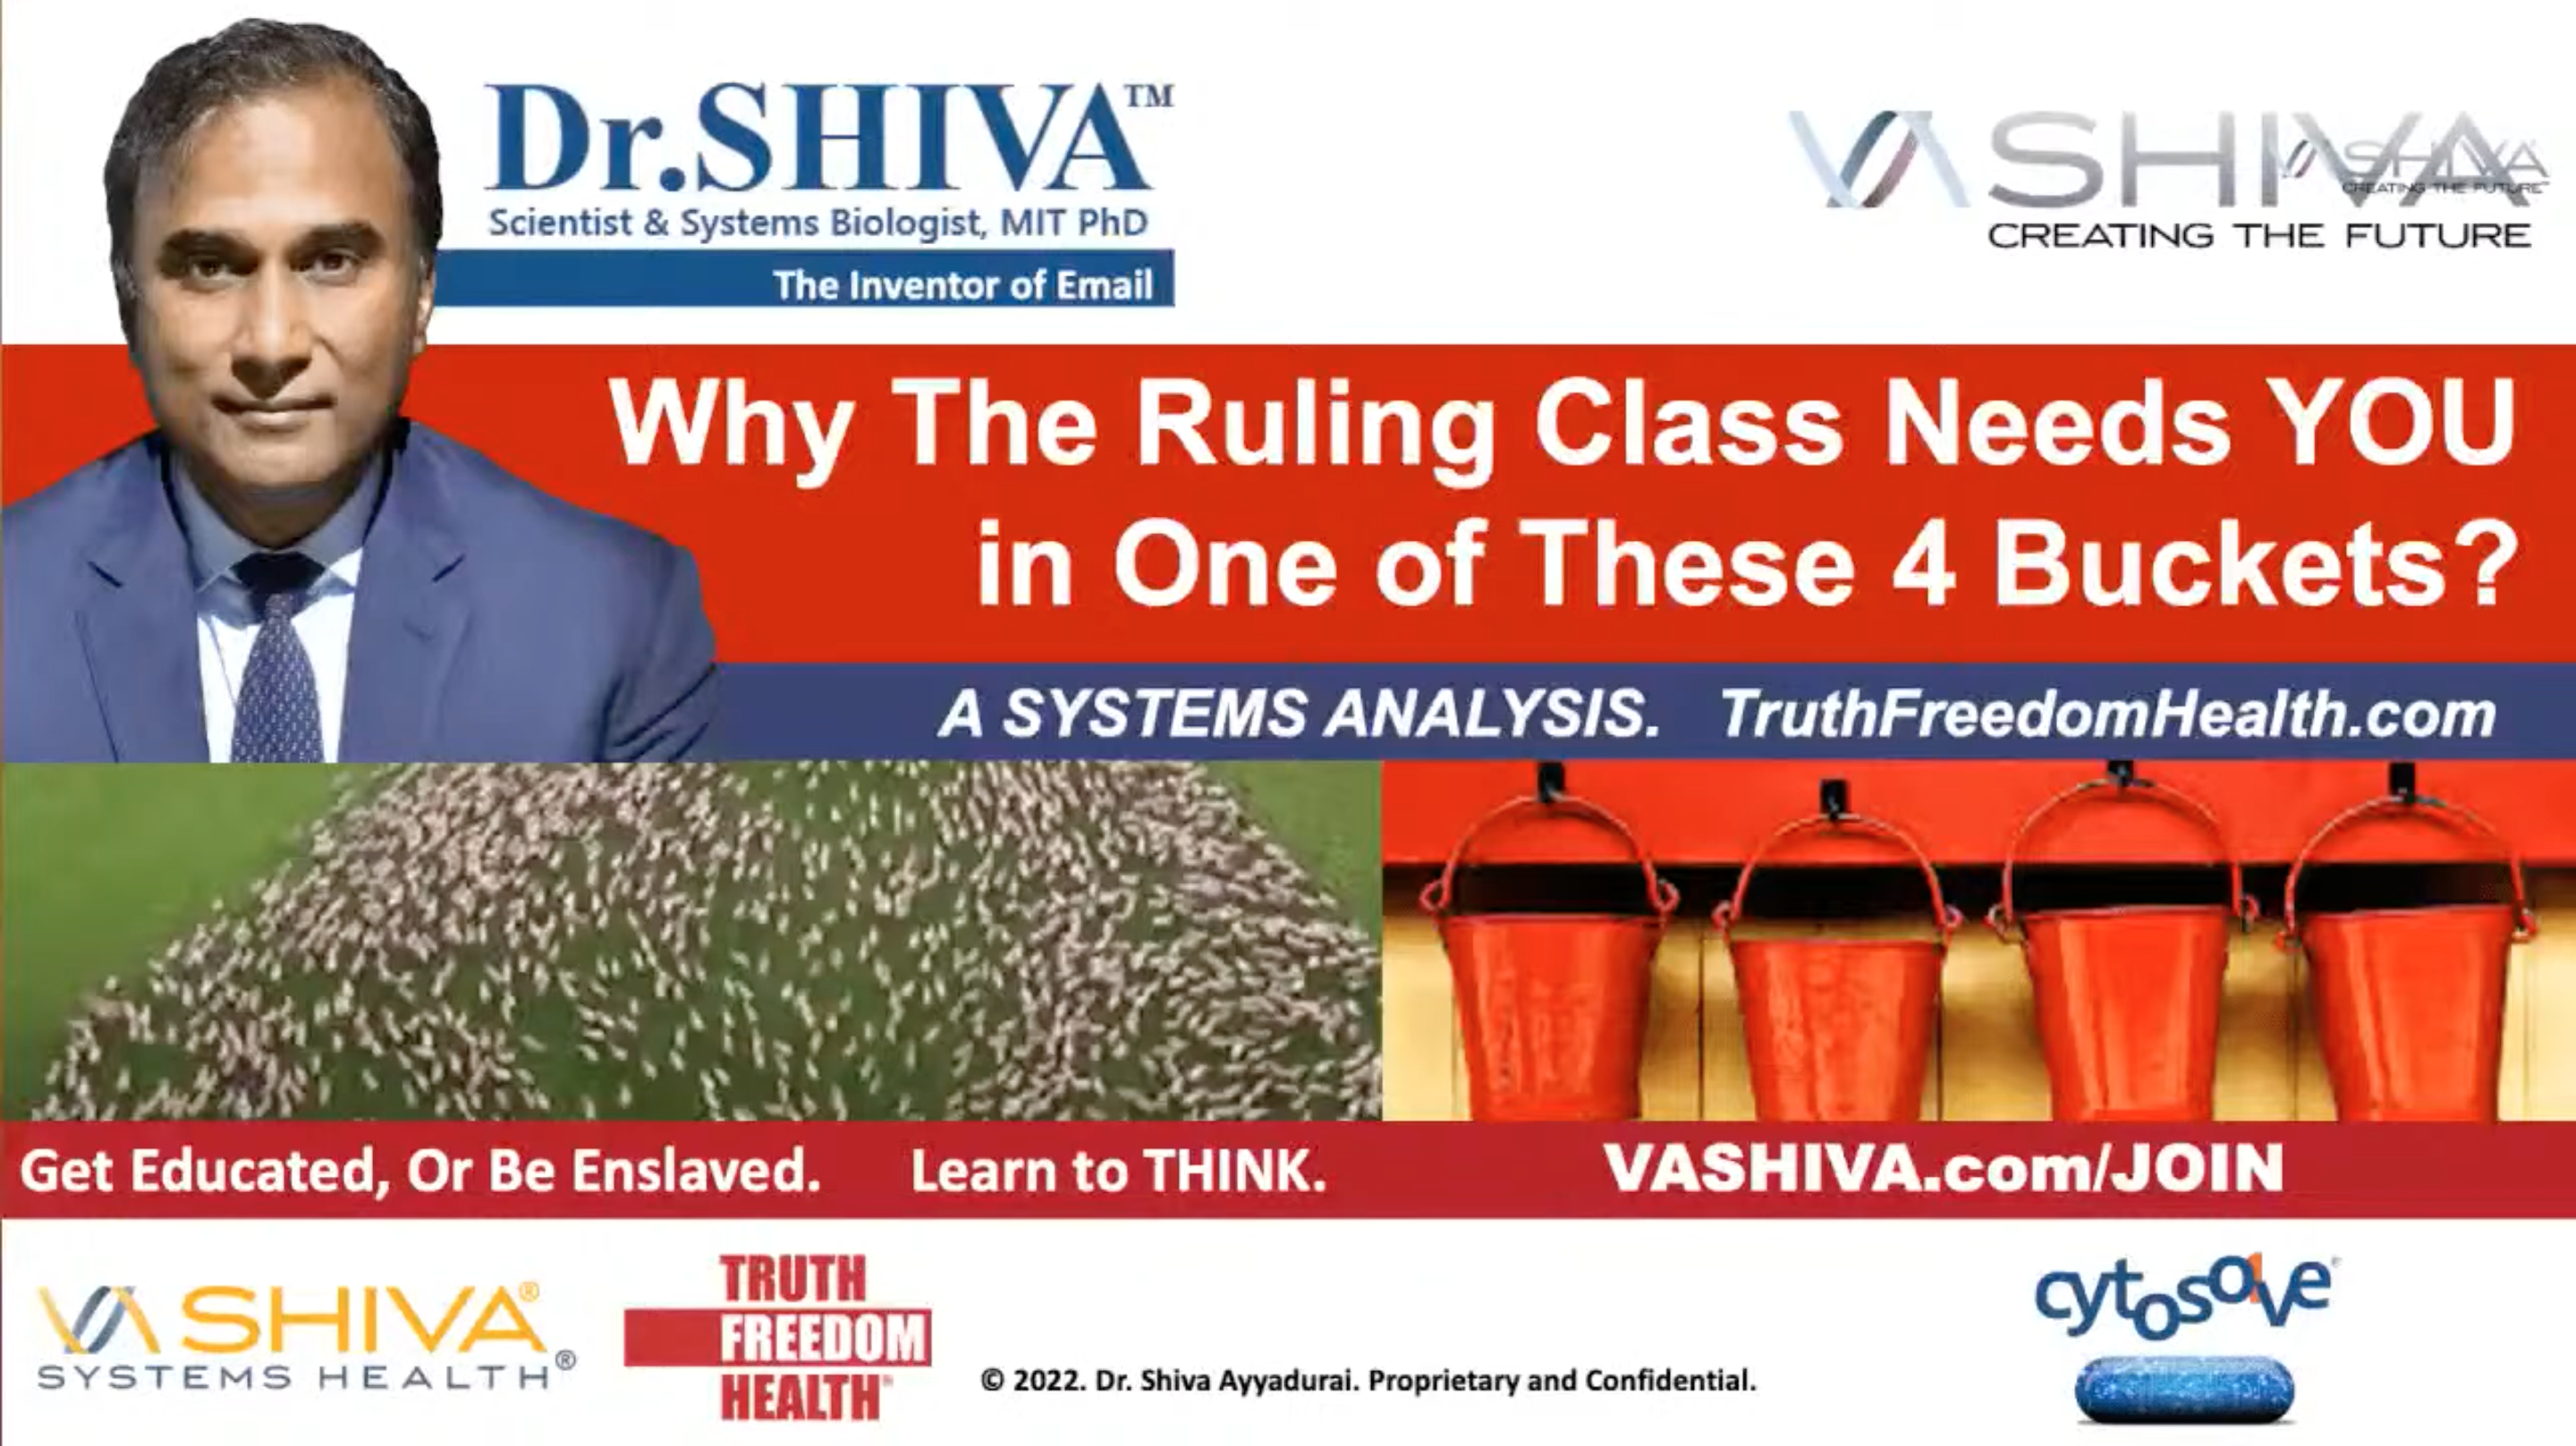 Dr.SHIVA LIVE: Why The Ruling Class Needs YOU in One of These 4 Buckets?